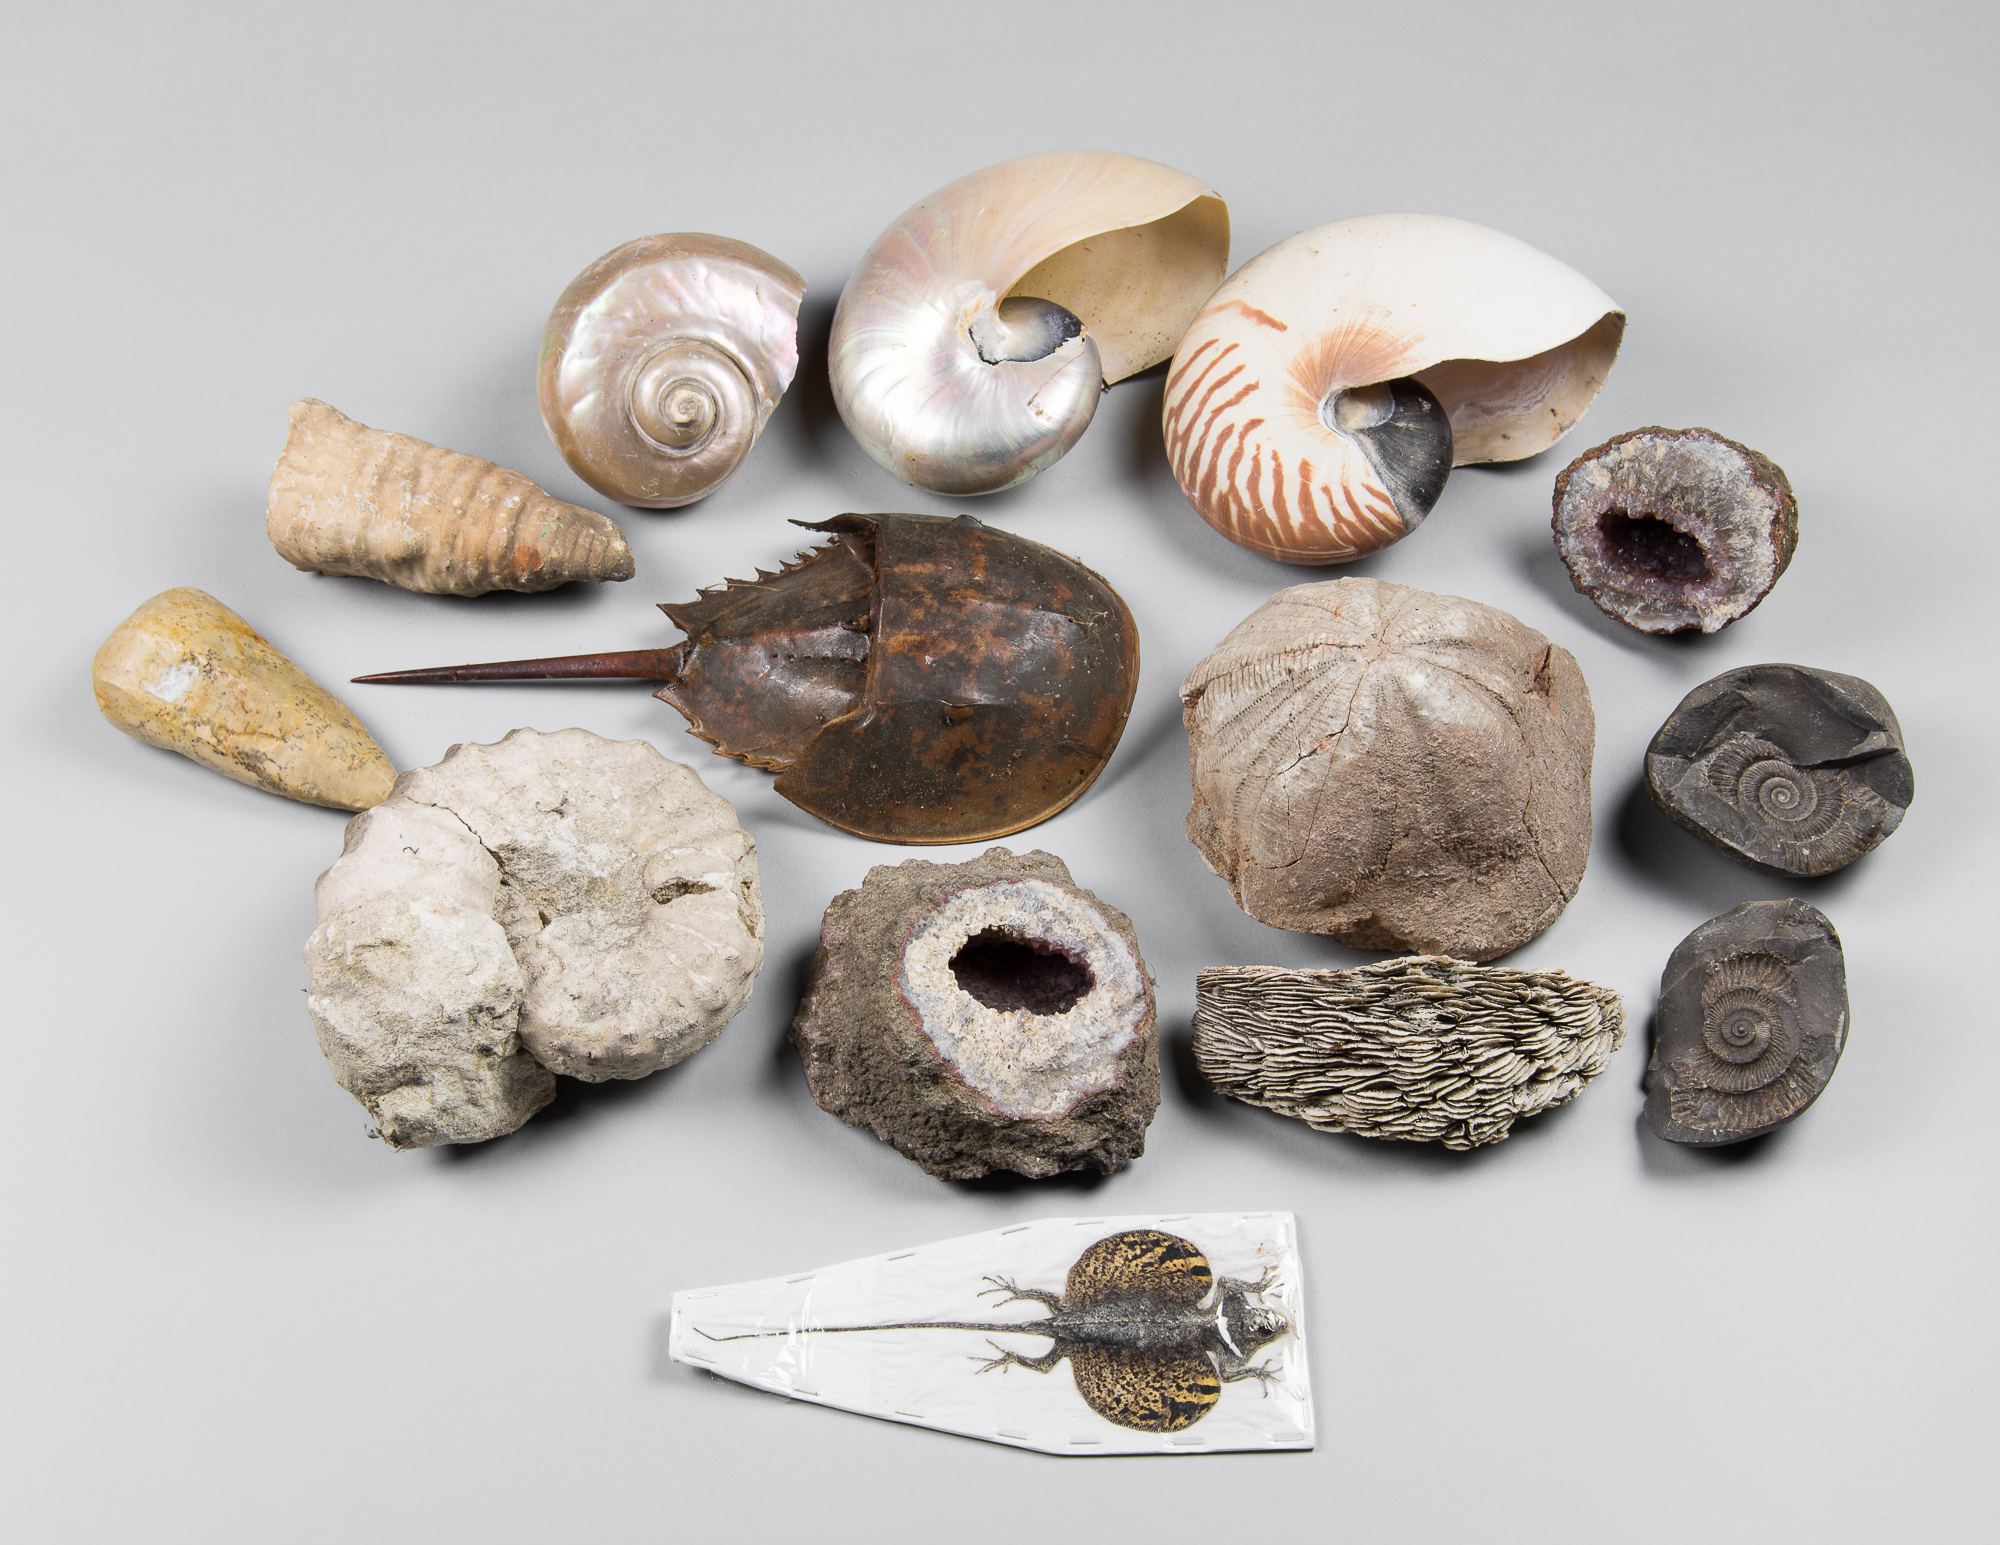 A COLLECTION OF FOSSILS, SEASHELLS AND OTHER SPECIMENS.